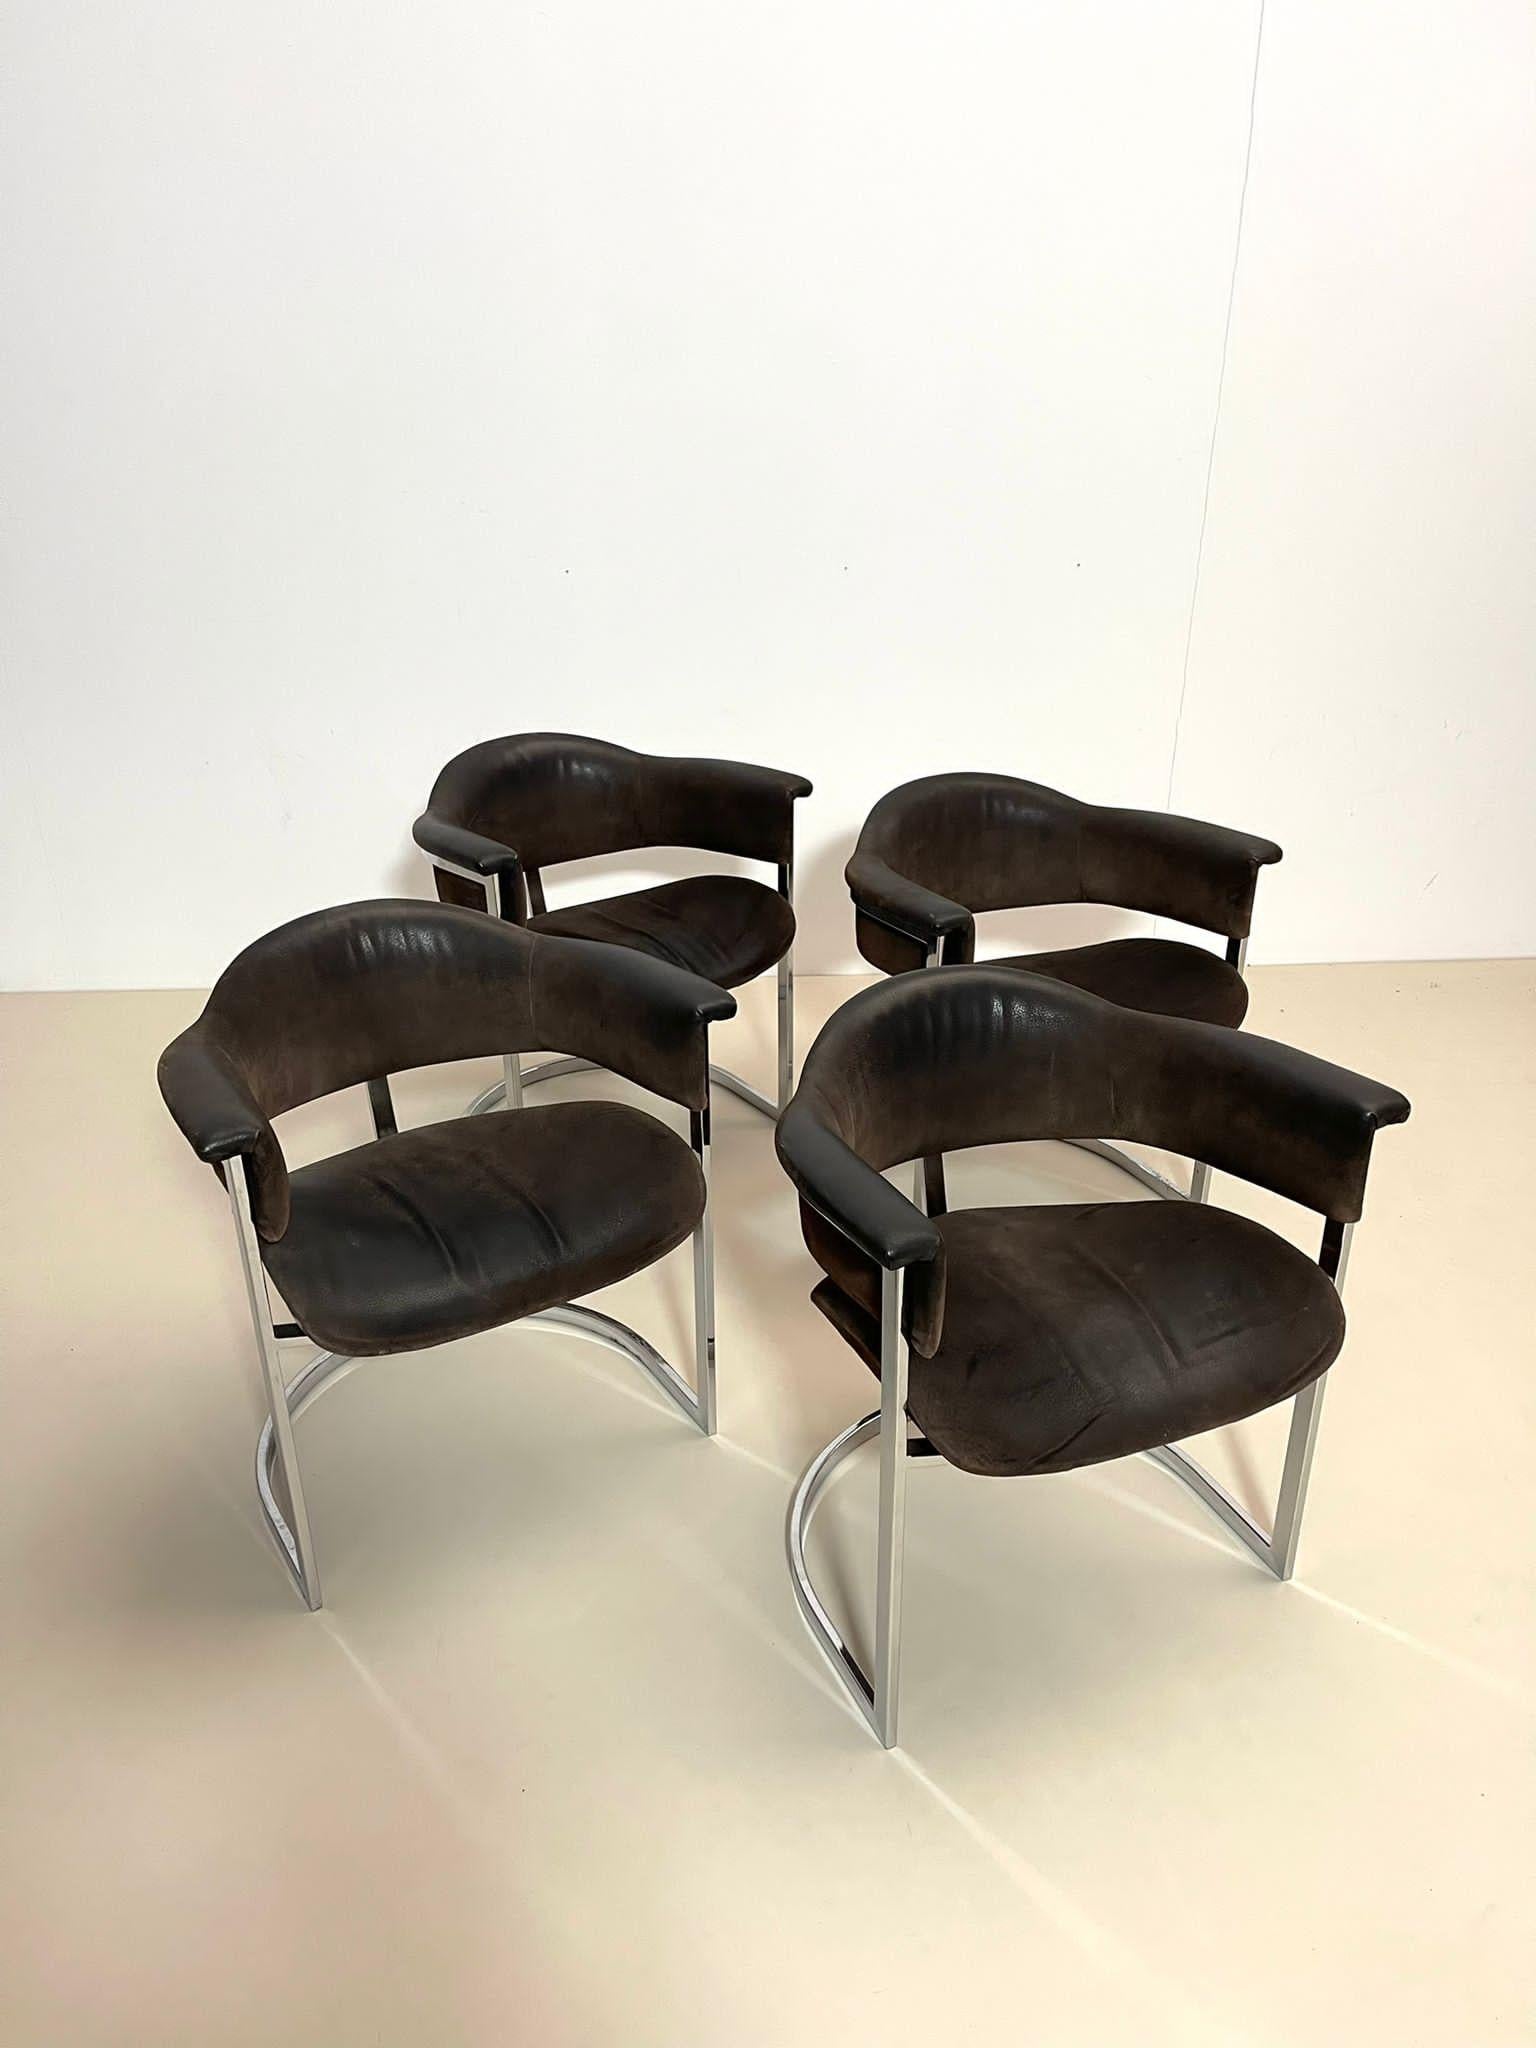 Pair of Chrome & Leather Armchairs by Vittorio Introini for Mario Sabot, 1970s For Sale 2